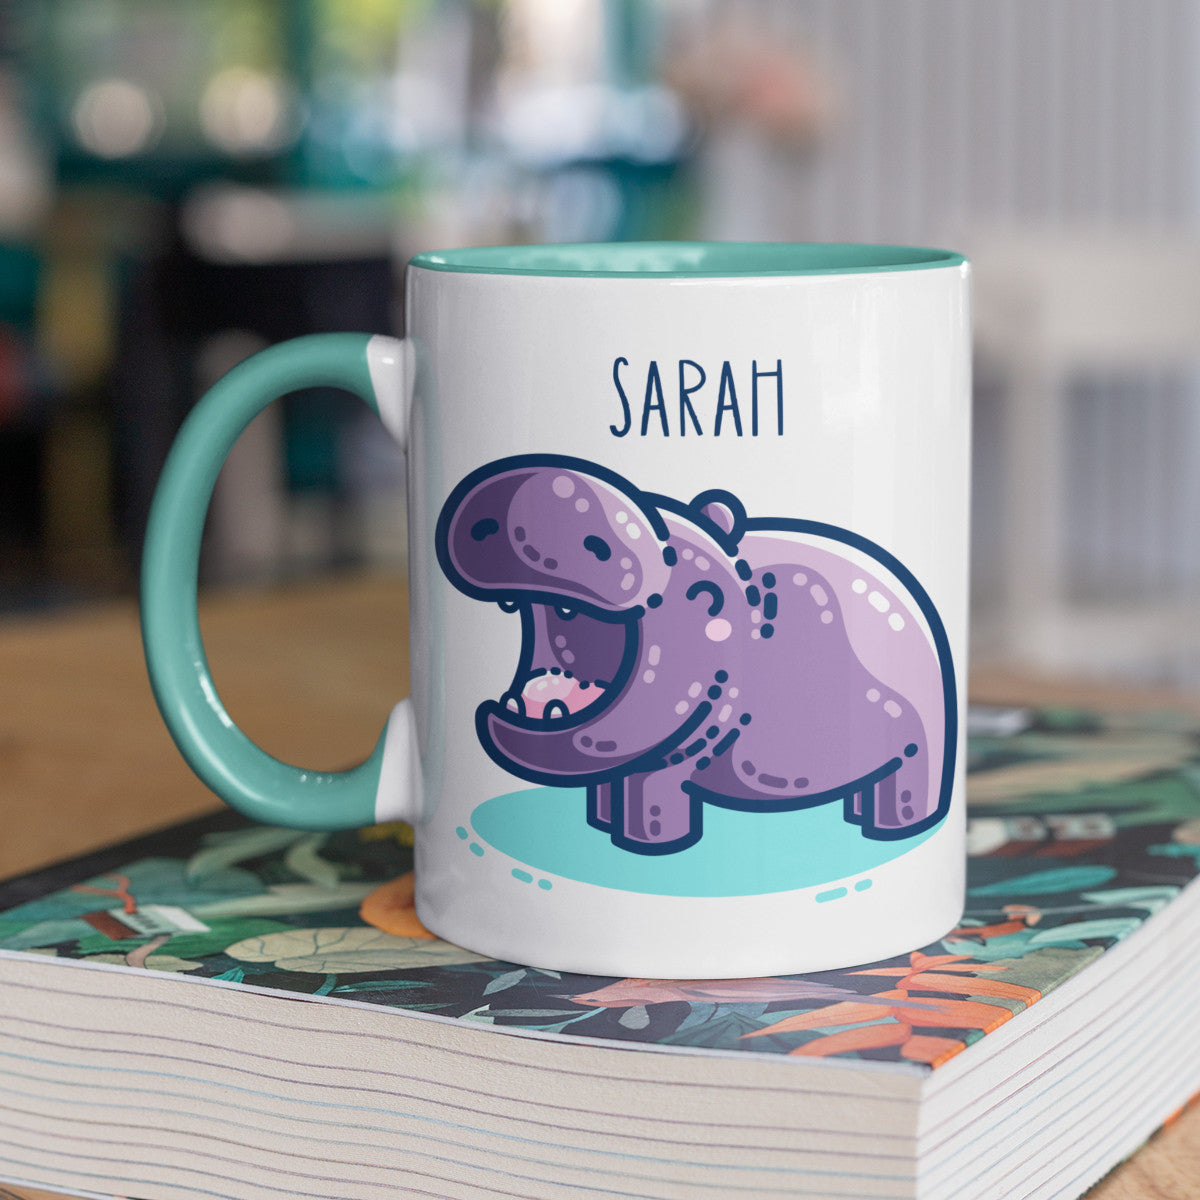 A white ceramic mug with a spearmint handle on the left and yellow inside. A name is written in thin dark blue upper case letters above a kawaii cute purple hippo with a thick dark blue outline and a turquoise shadow beneath. The hippo is seen side on facing to the left and looks happy with its mouth open wide.